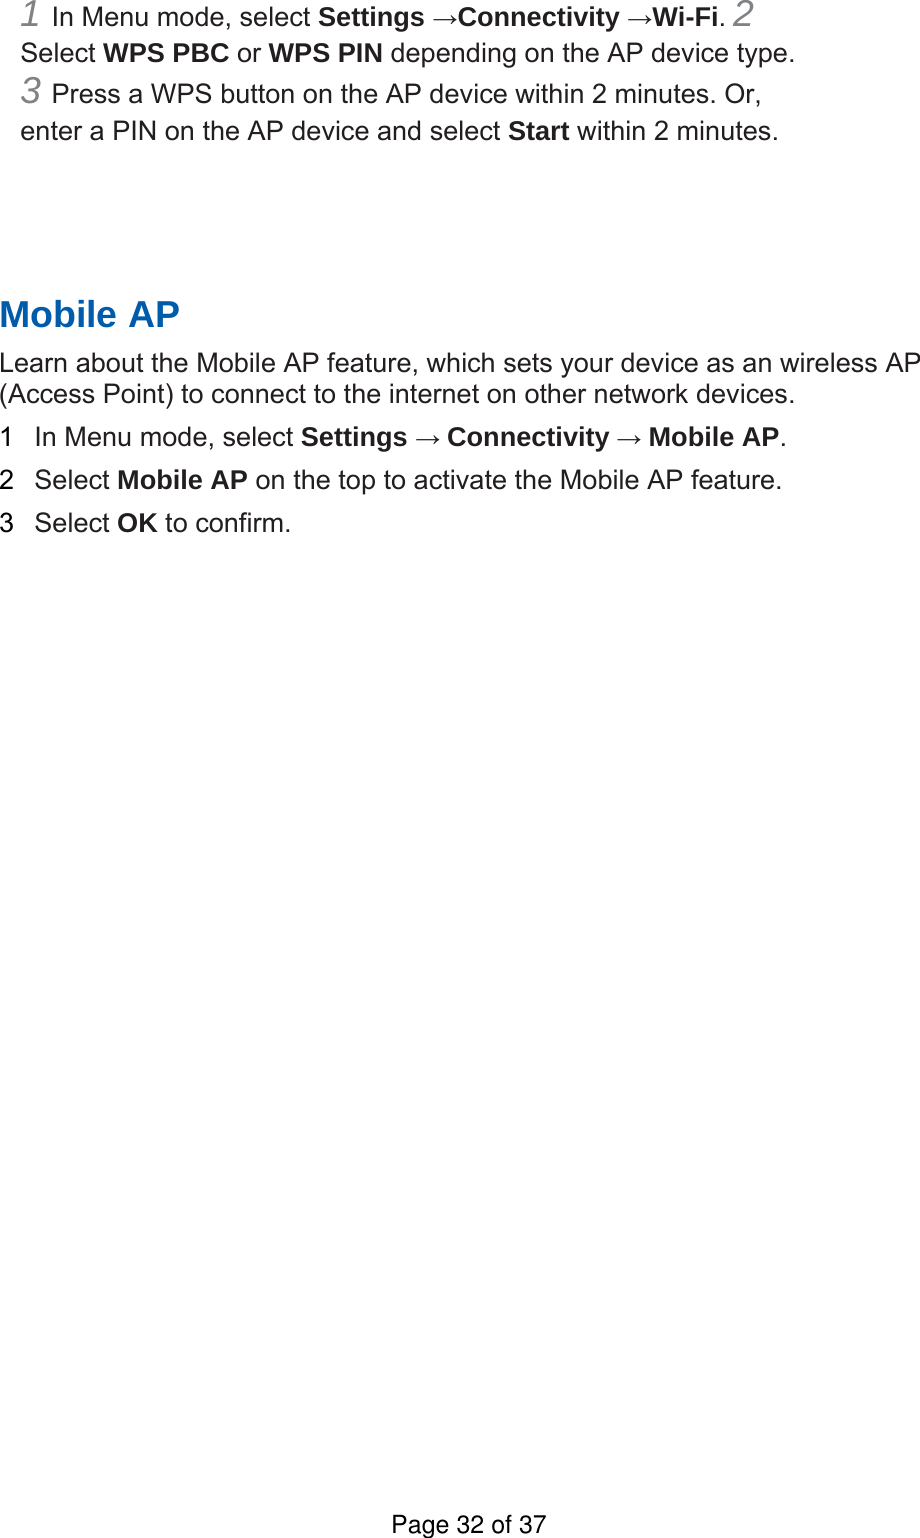 1 In Menu mode, select Settings →Connectivity →Wi-Fi. 2 Select WPS PBC or WPS PIN depending on the AP device type. 3 Press a WPS button on the AP device within 2 minutes. Or, enter a PIN on the AP device and select Start within 2 minutes.       Mobile AP   Learn about the Mobile AP feature, which sets your device as an wireless AP (Access Point) to connect to the internet on other network devices.   1  In Menu mode, select Settings → Connectivity → Mobile AP.  2  Select Mobile AP on the top to activate the Mobile AP feature.   3  Select OK to confirm.      Page 32 of 37